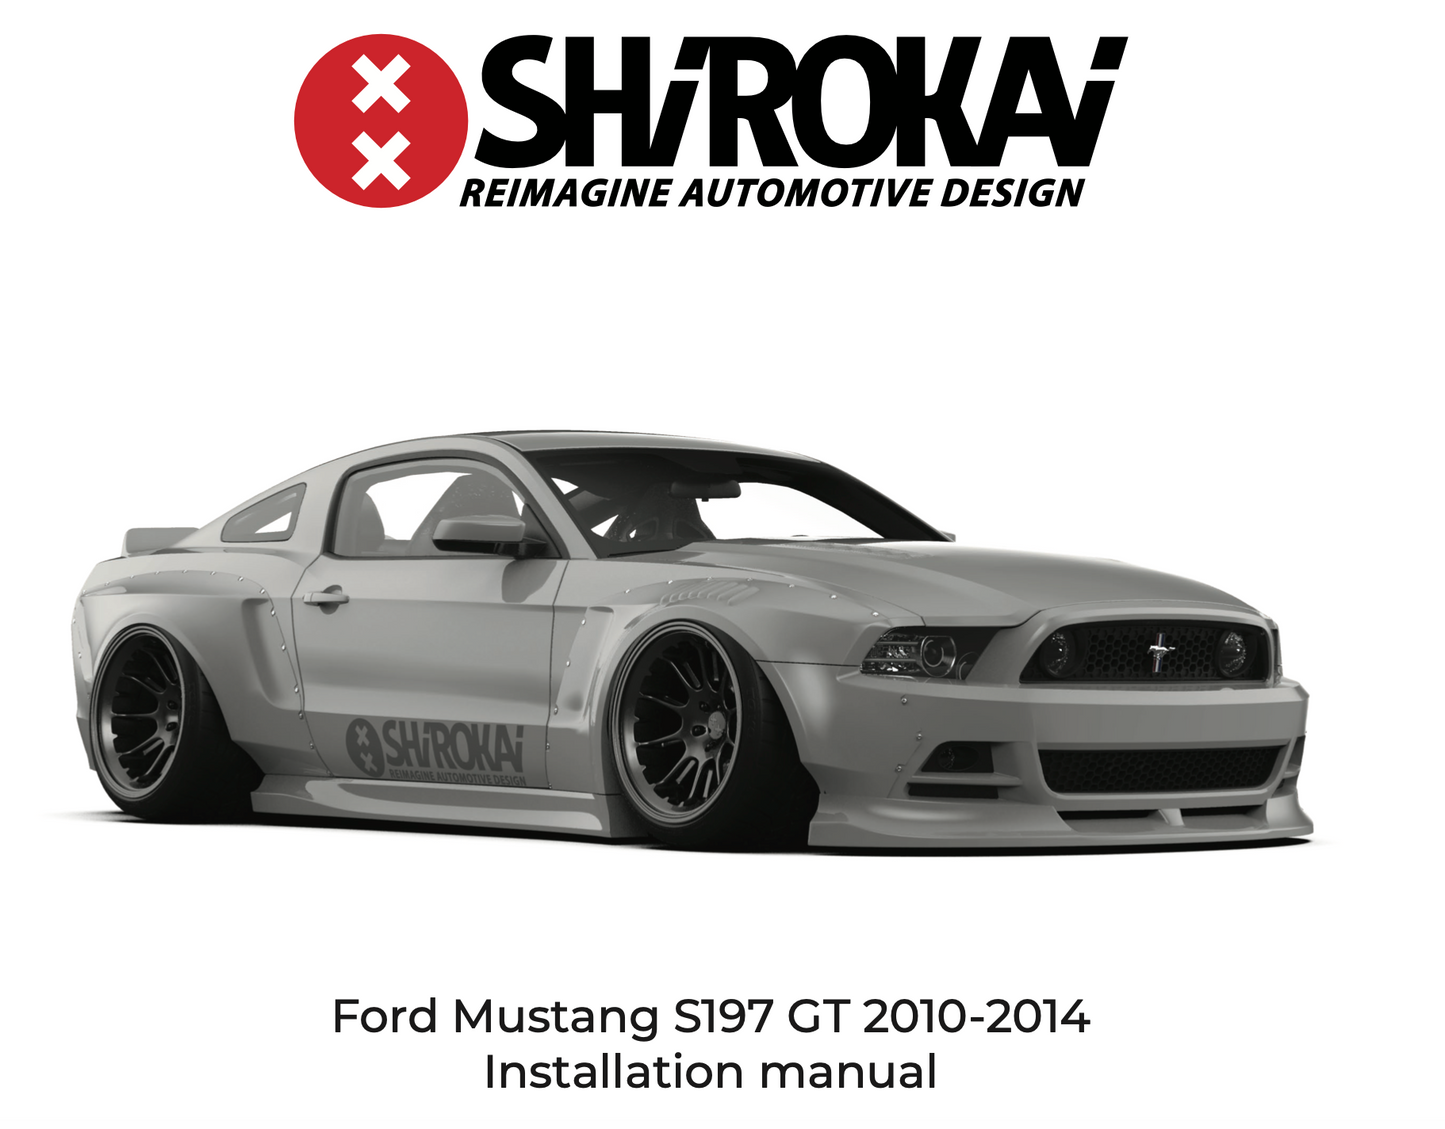 How to install the widebody kit for Ford Mustang S197 2005 - 2014 - SHIROKAI - widebody kits 